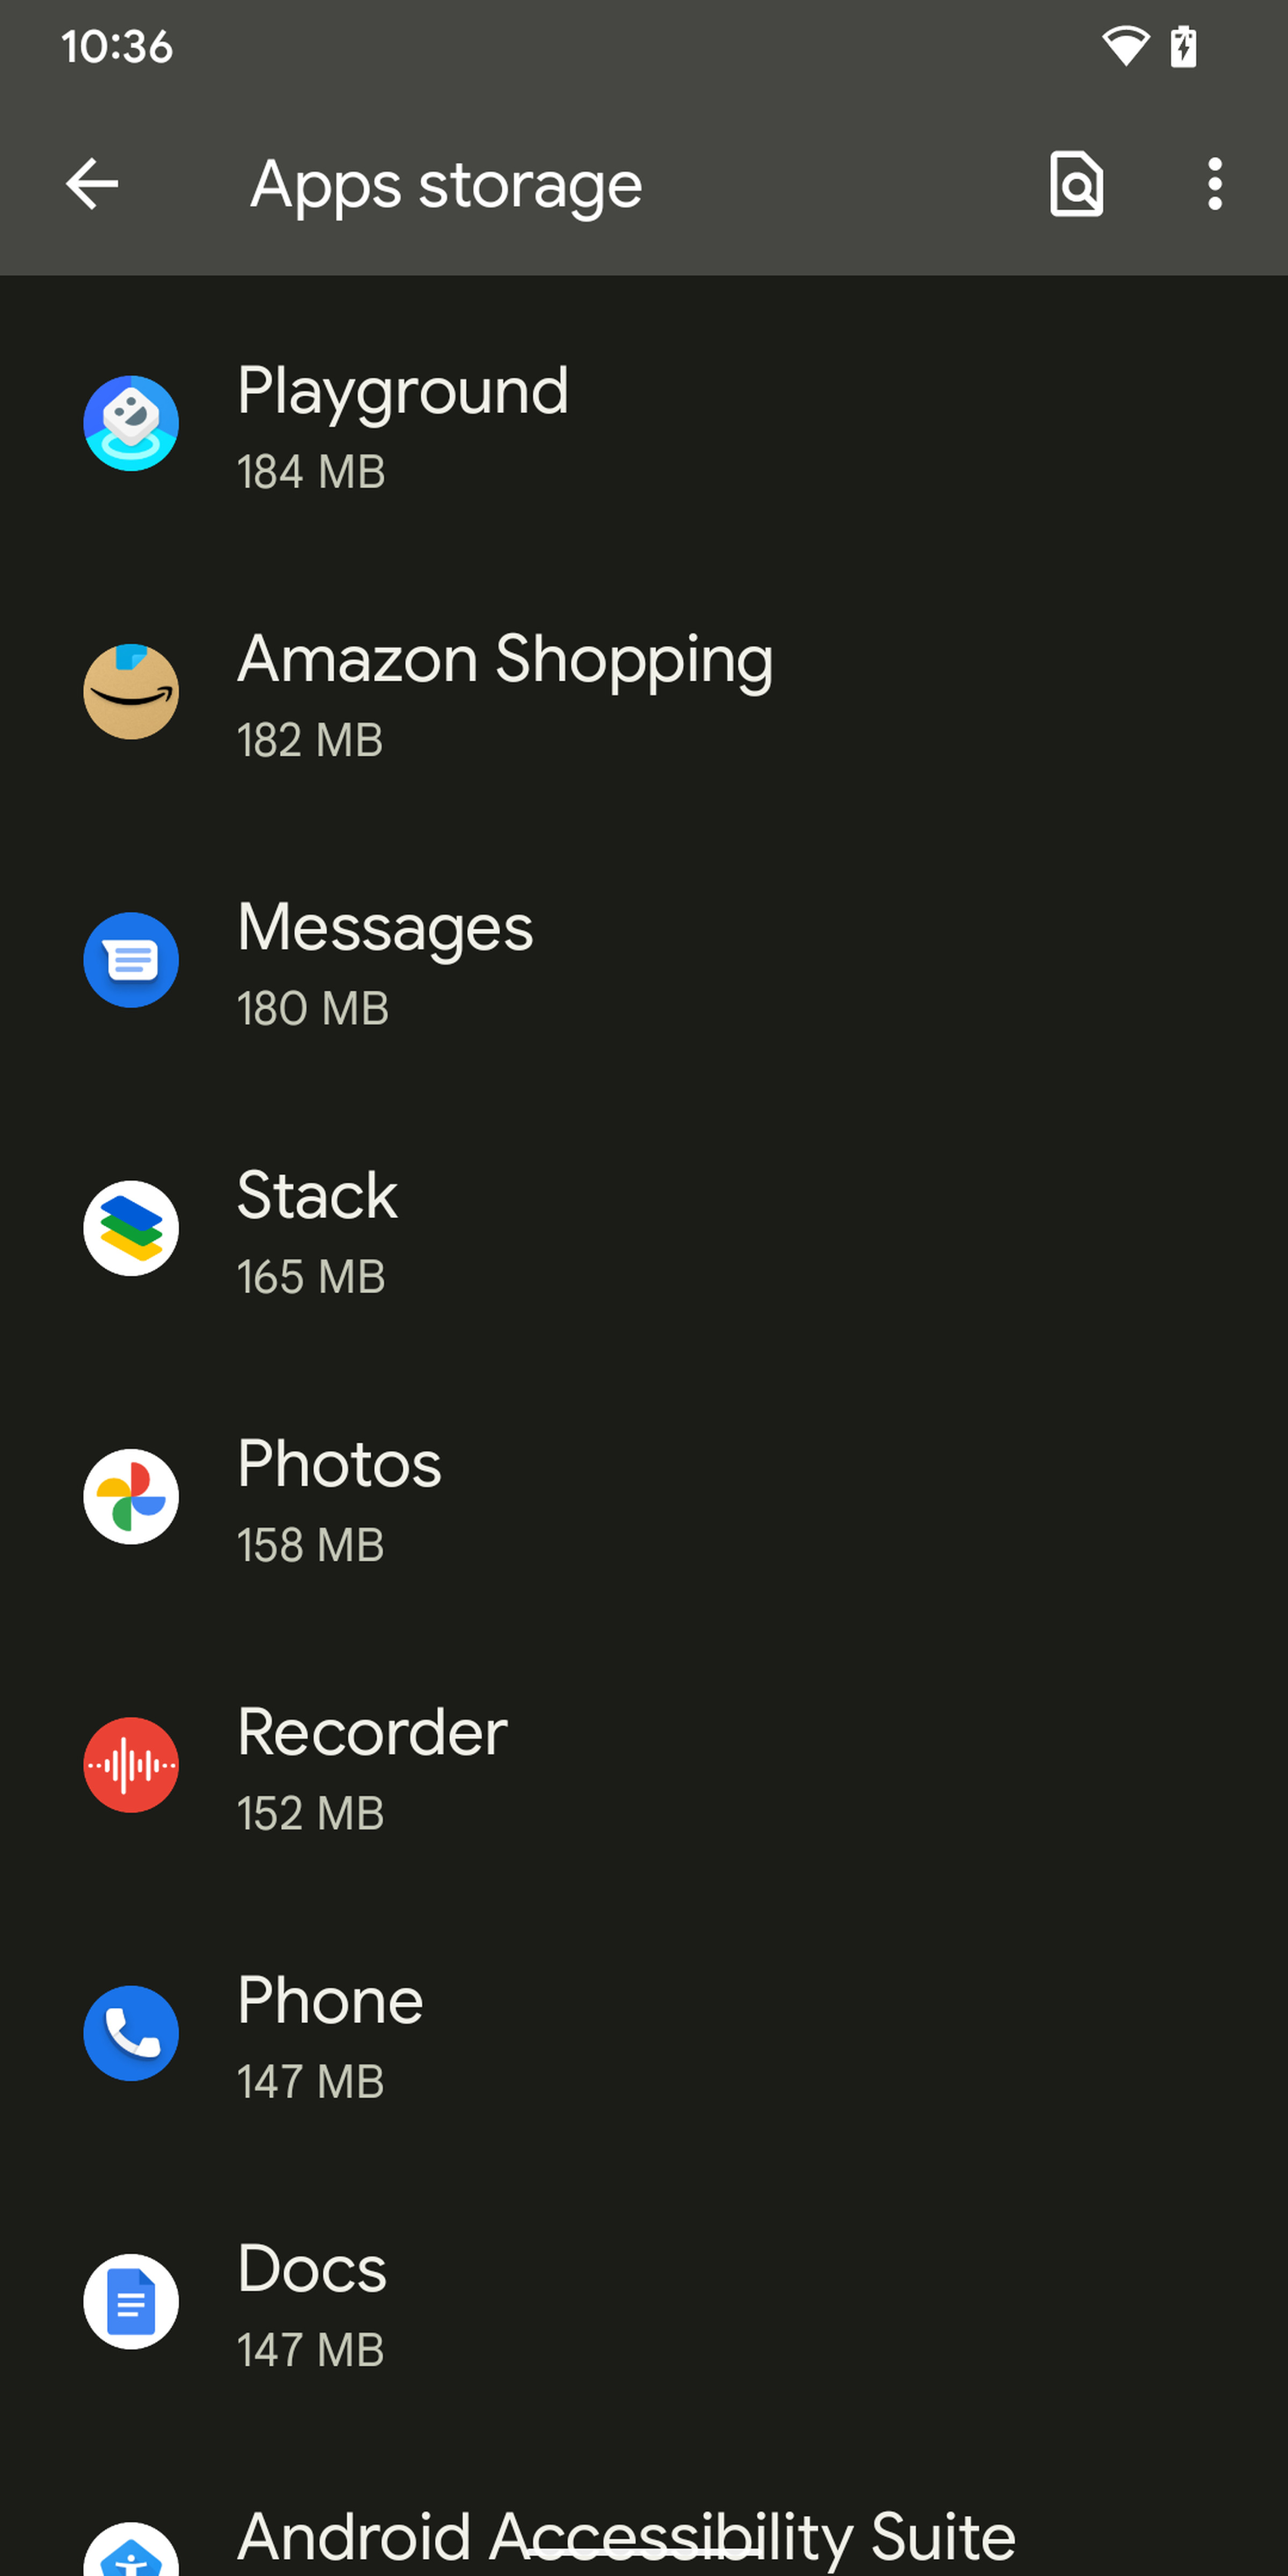 In Storage &gt; Apps, you can see how much space apps take up.